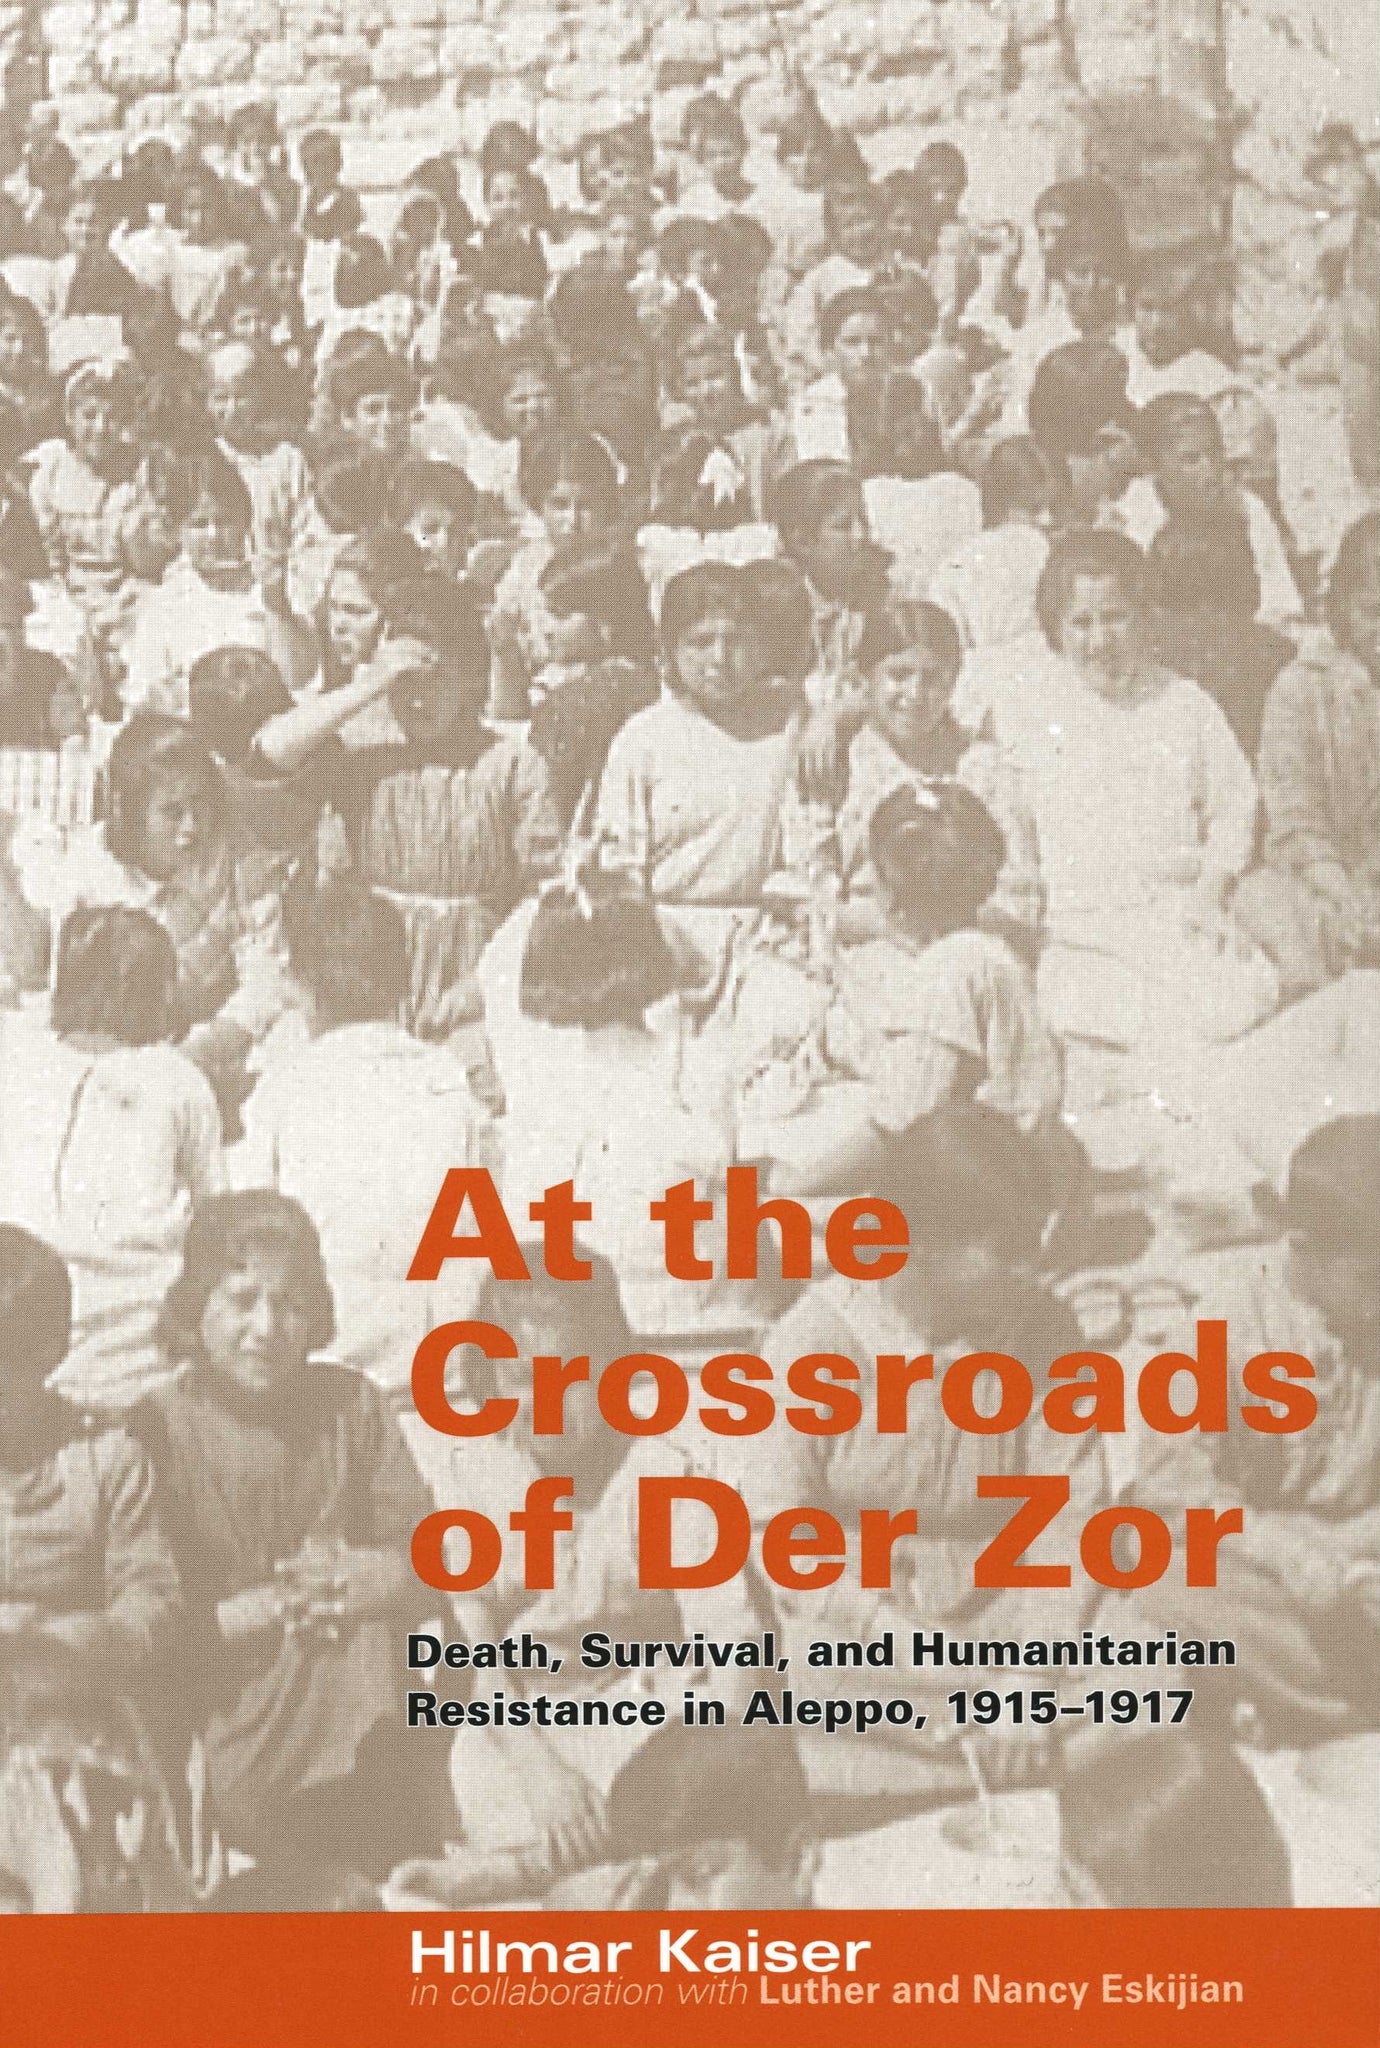 AT THE CROSSROADS OF DER ZOR: Death, Survival, and Humanitarian Resistance in Aleppo, 1915-1917